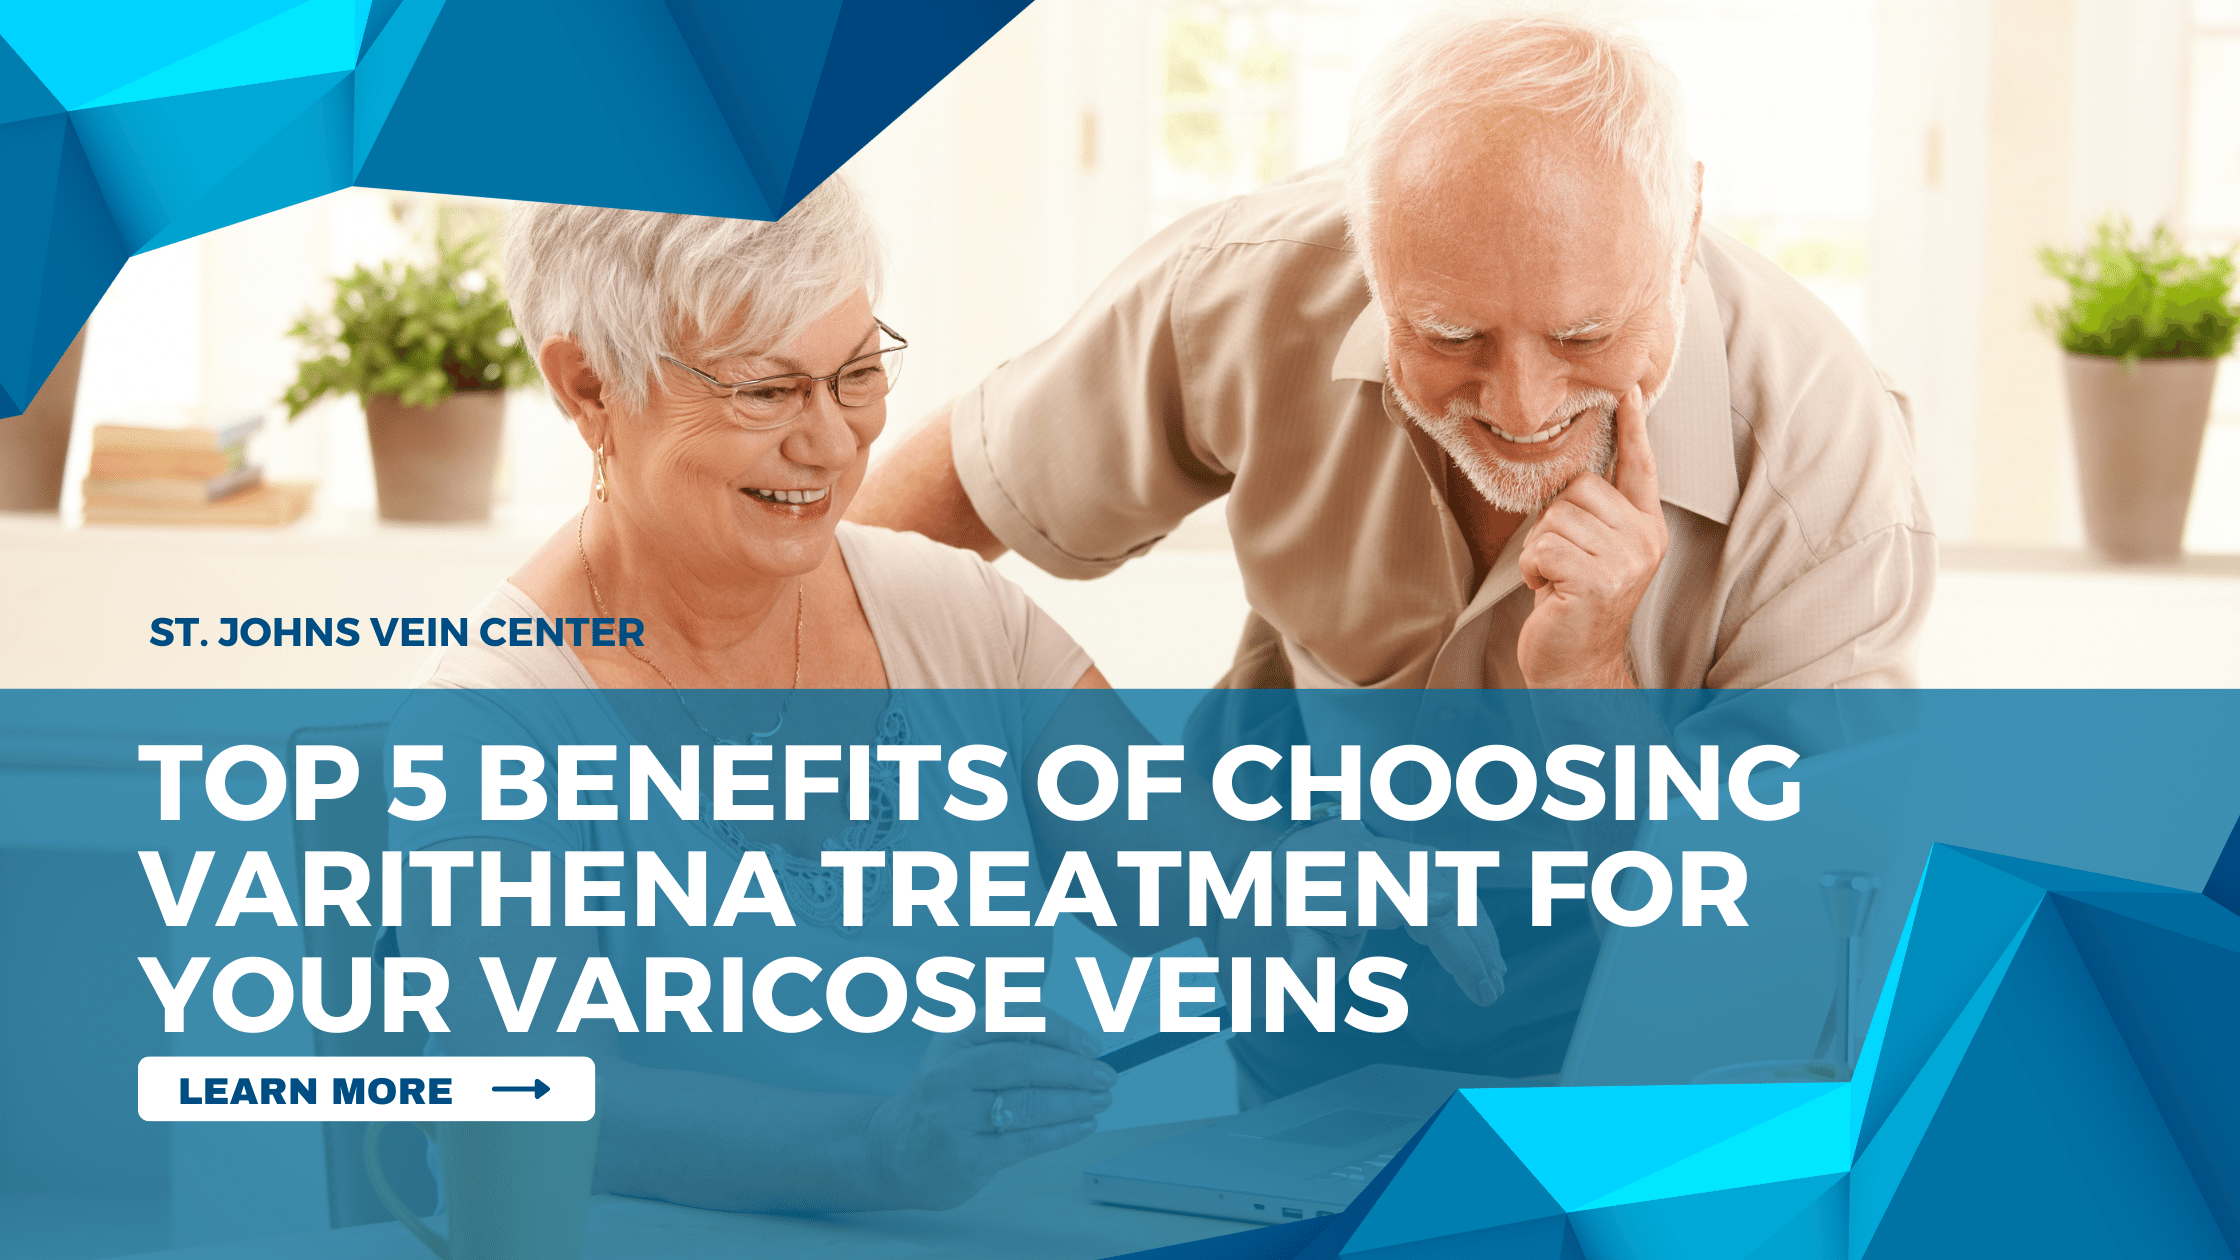 Top 5 Benefits of Choosing Varithena Treatment for Your Varicose Veins